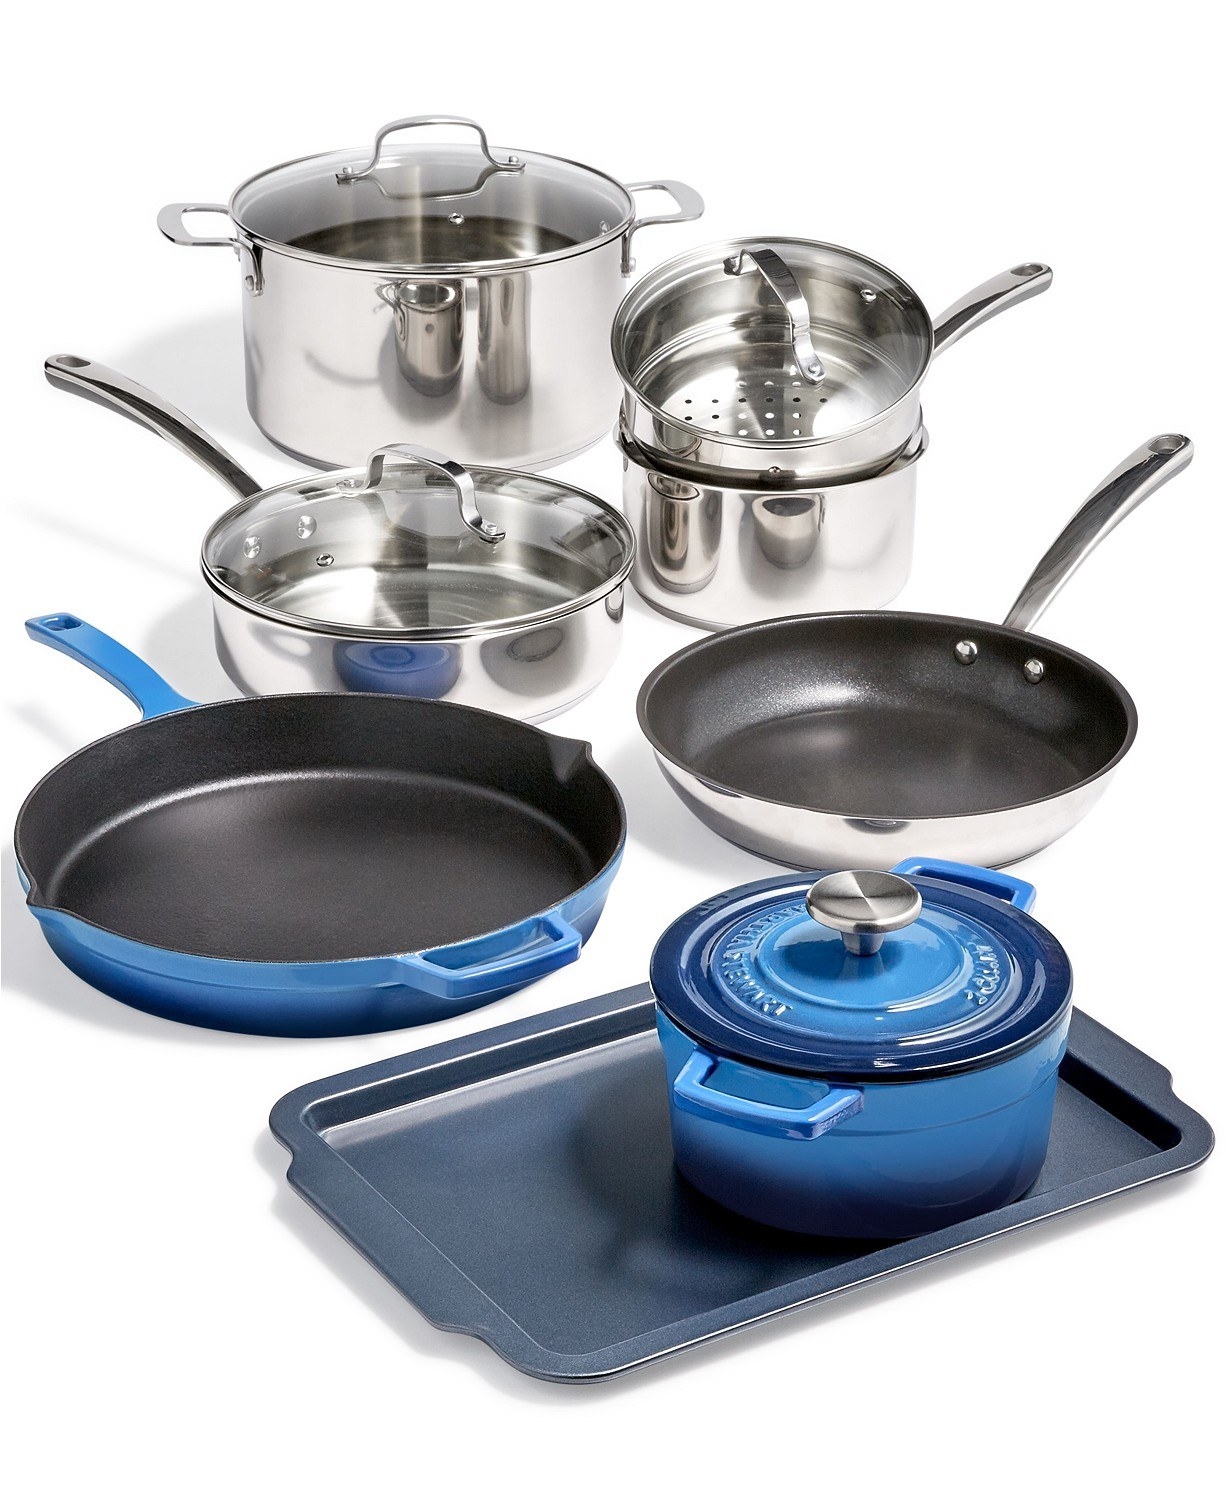 The contents of the set, which the cast iron products in blue 